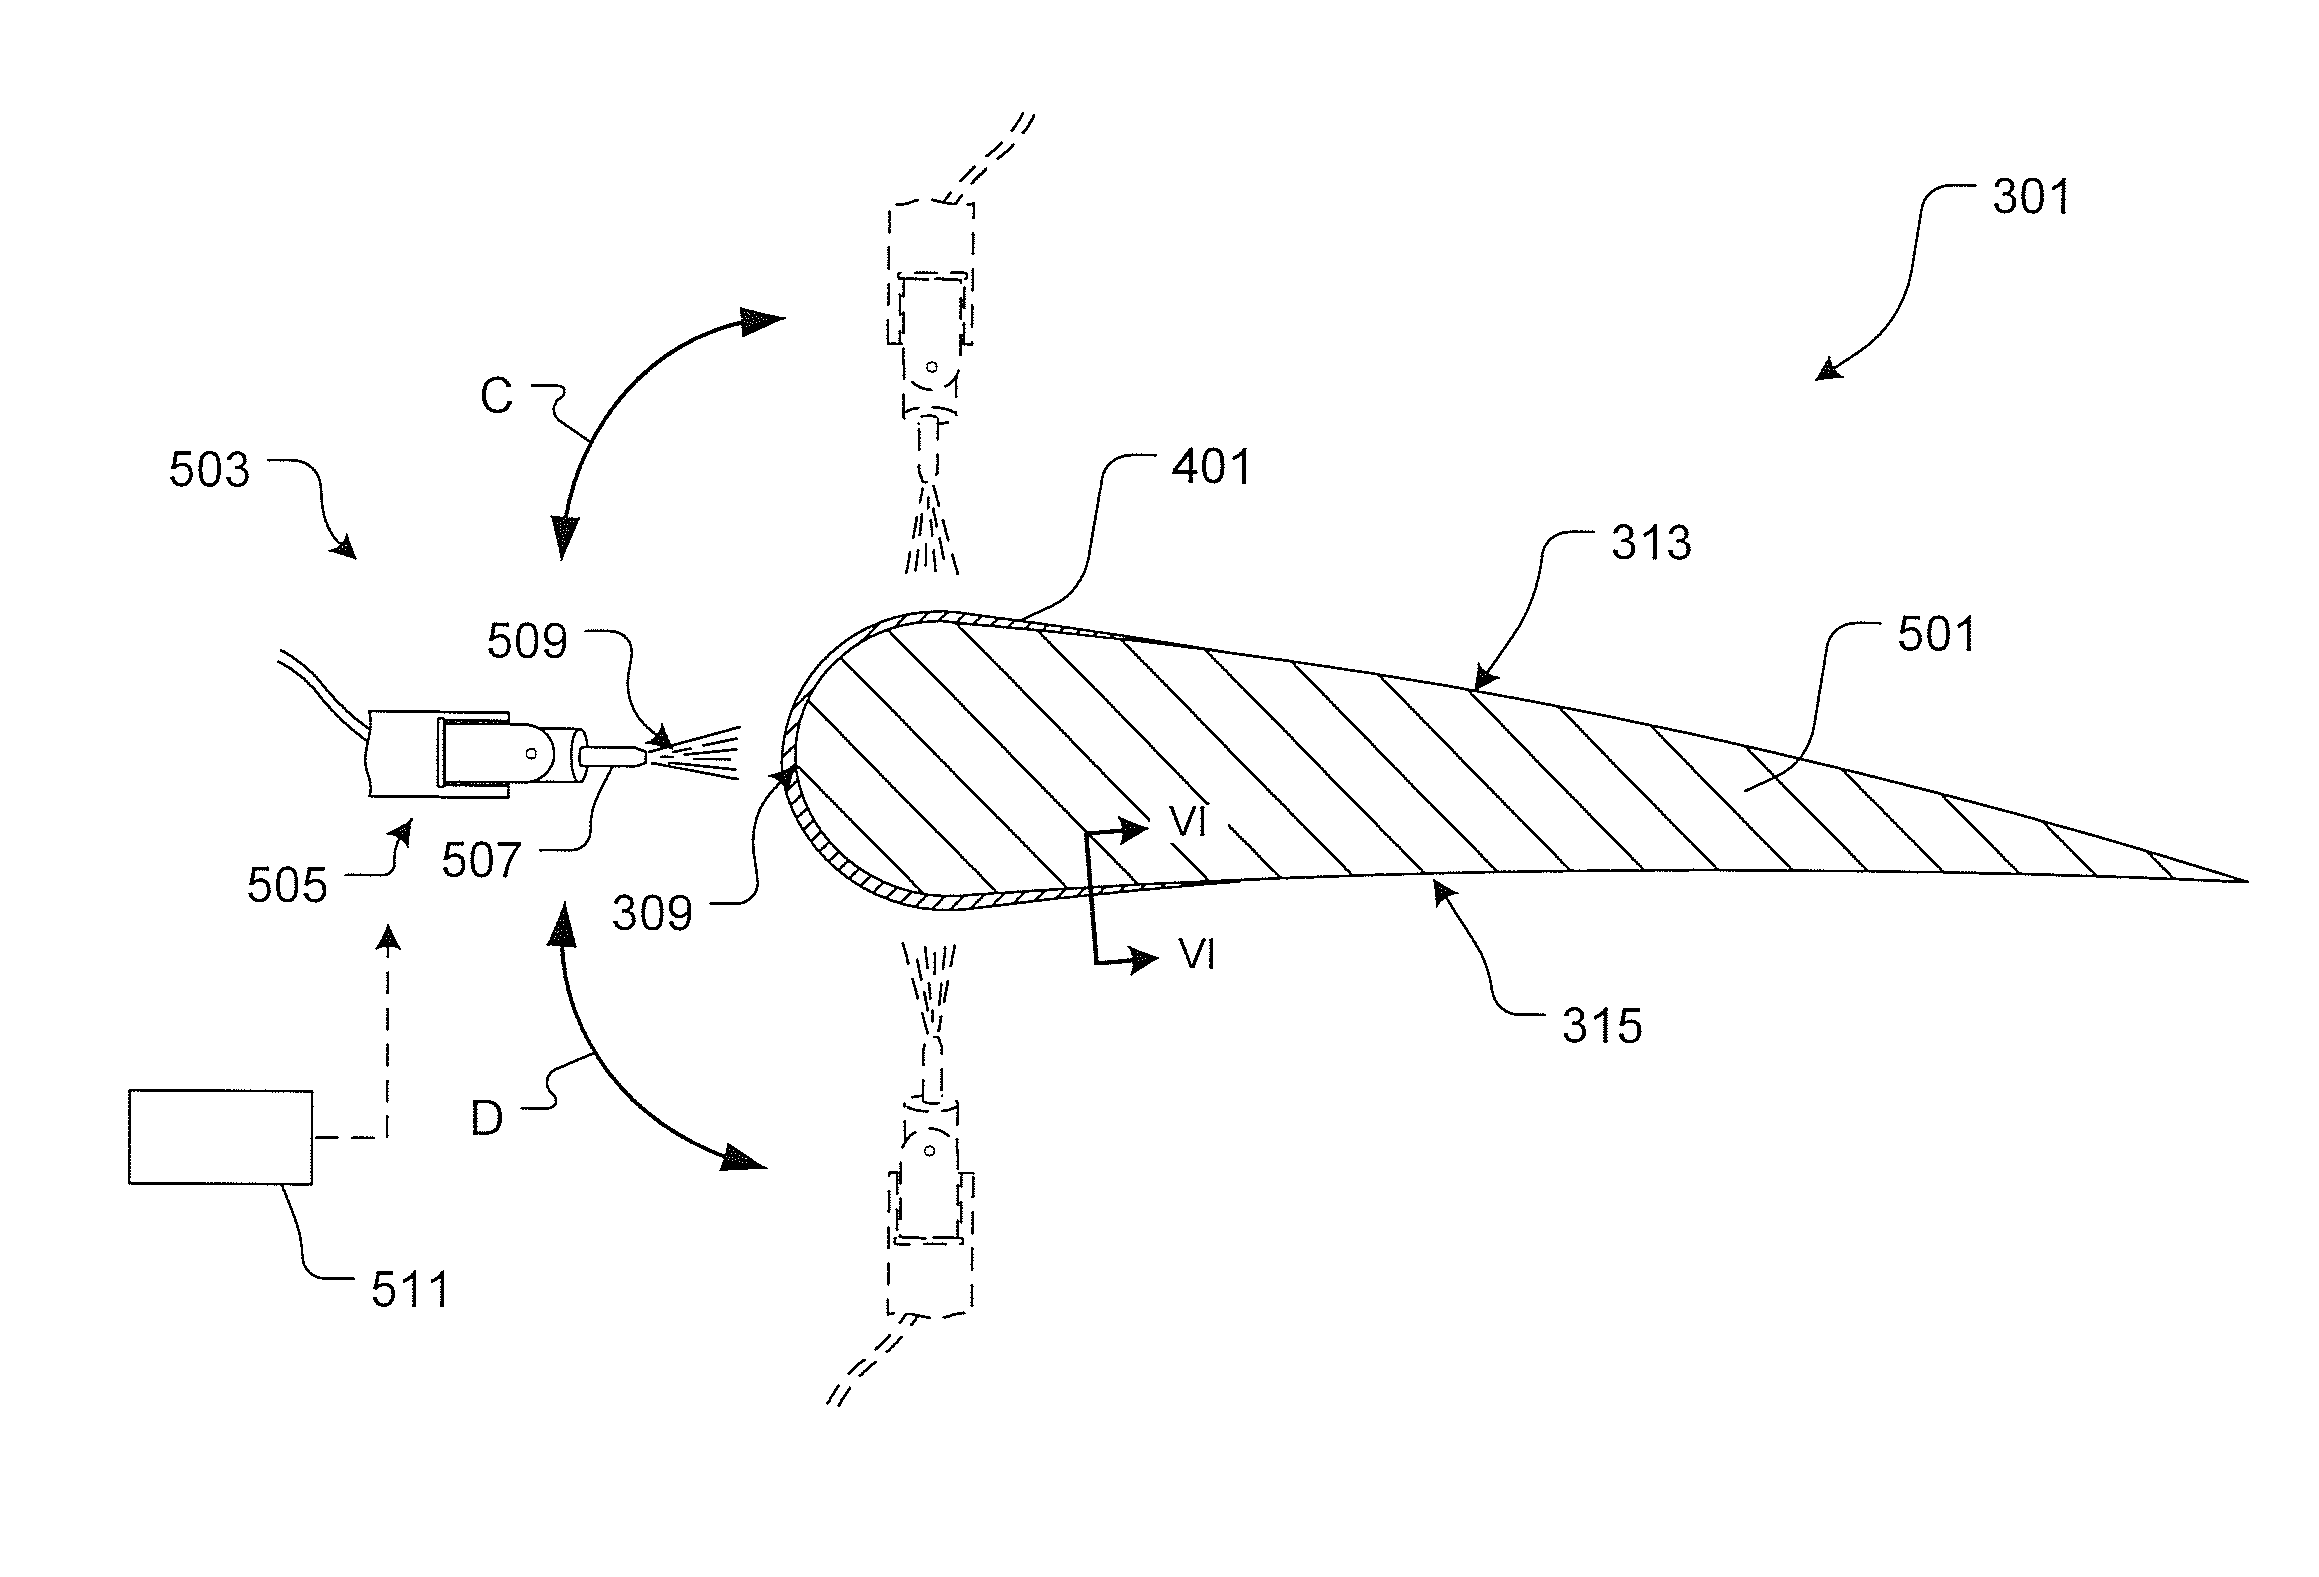 Method of Applying Abrasion Resistant Materials to Rotors